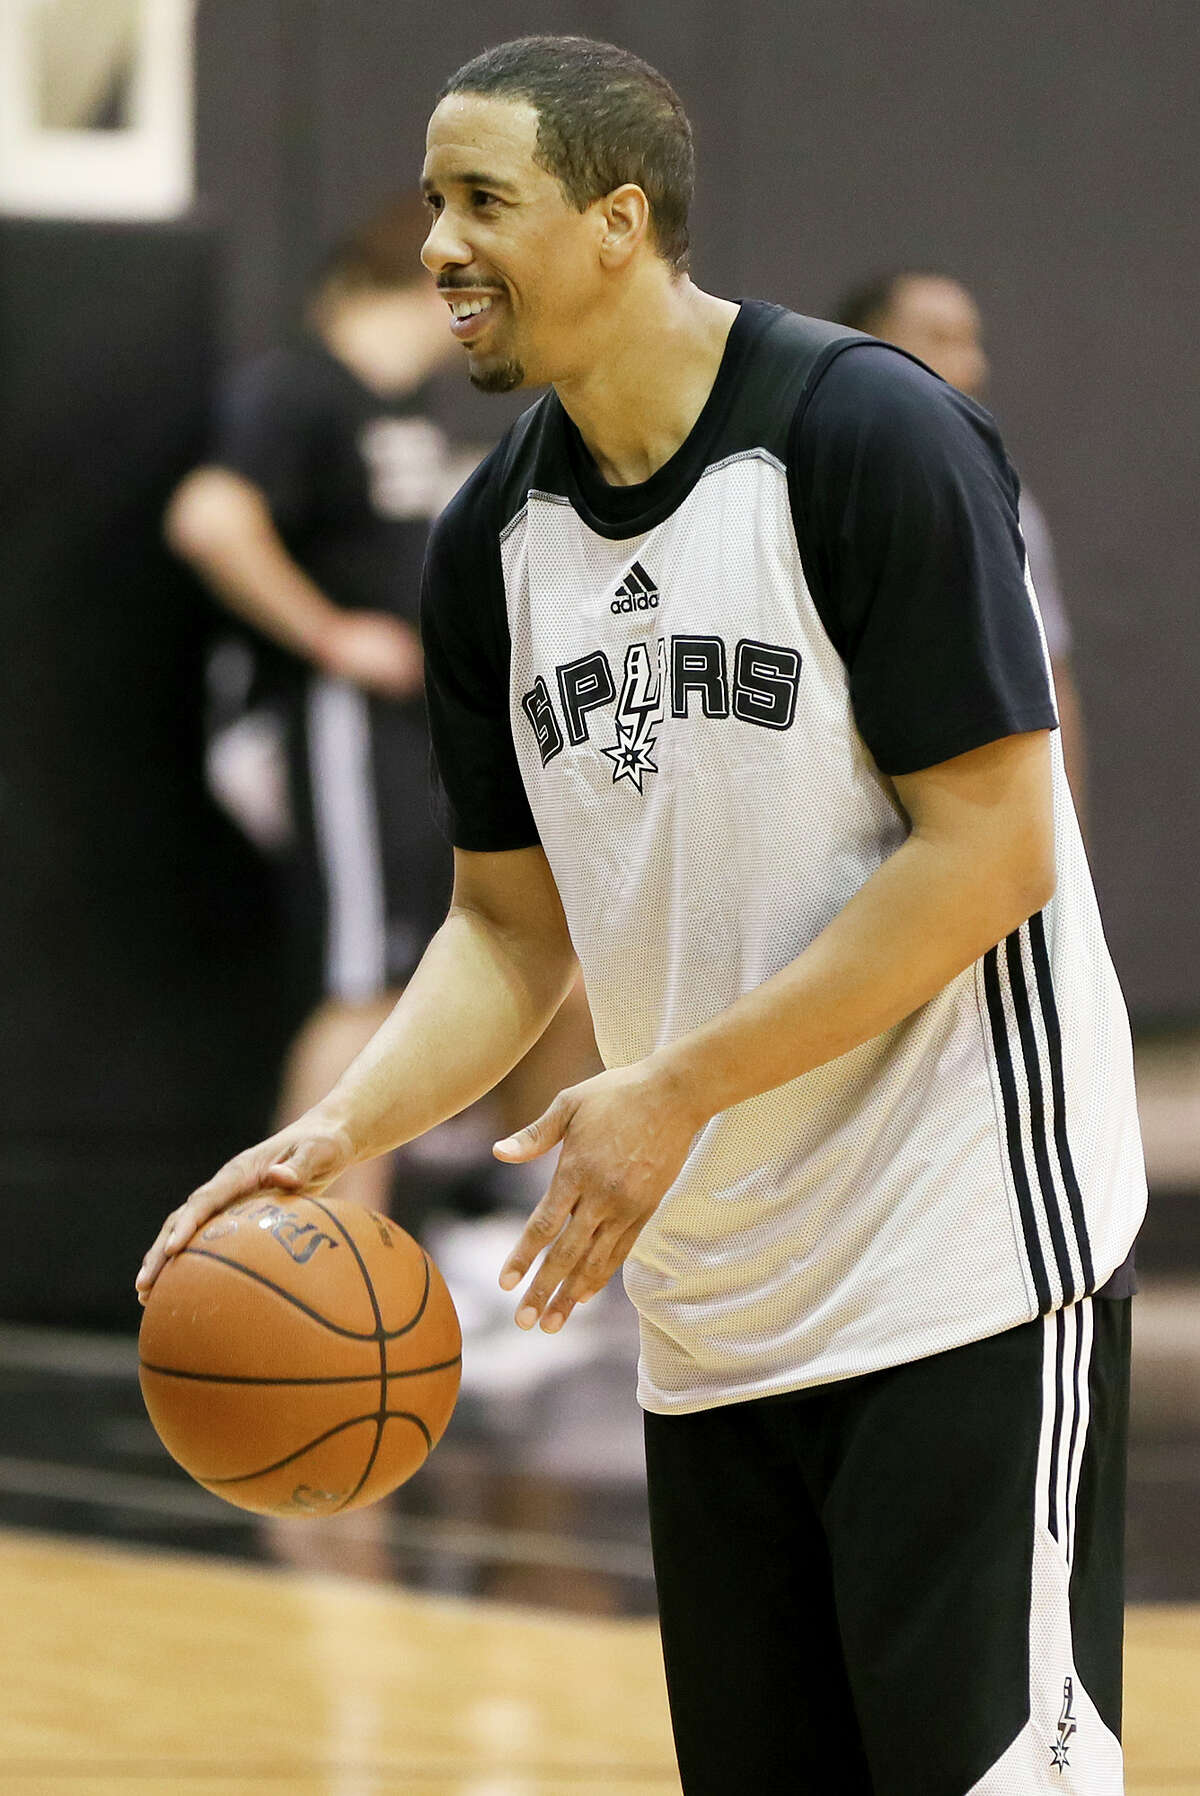 The newest Spurs roster addition, veteran guard Andre Miller, during his first workout at the Spurs practice facility on Tuesday, March 1, 2016.